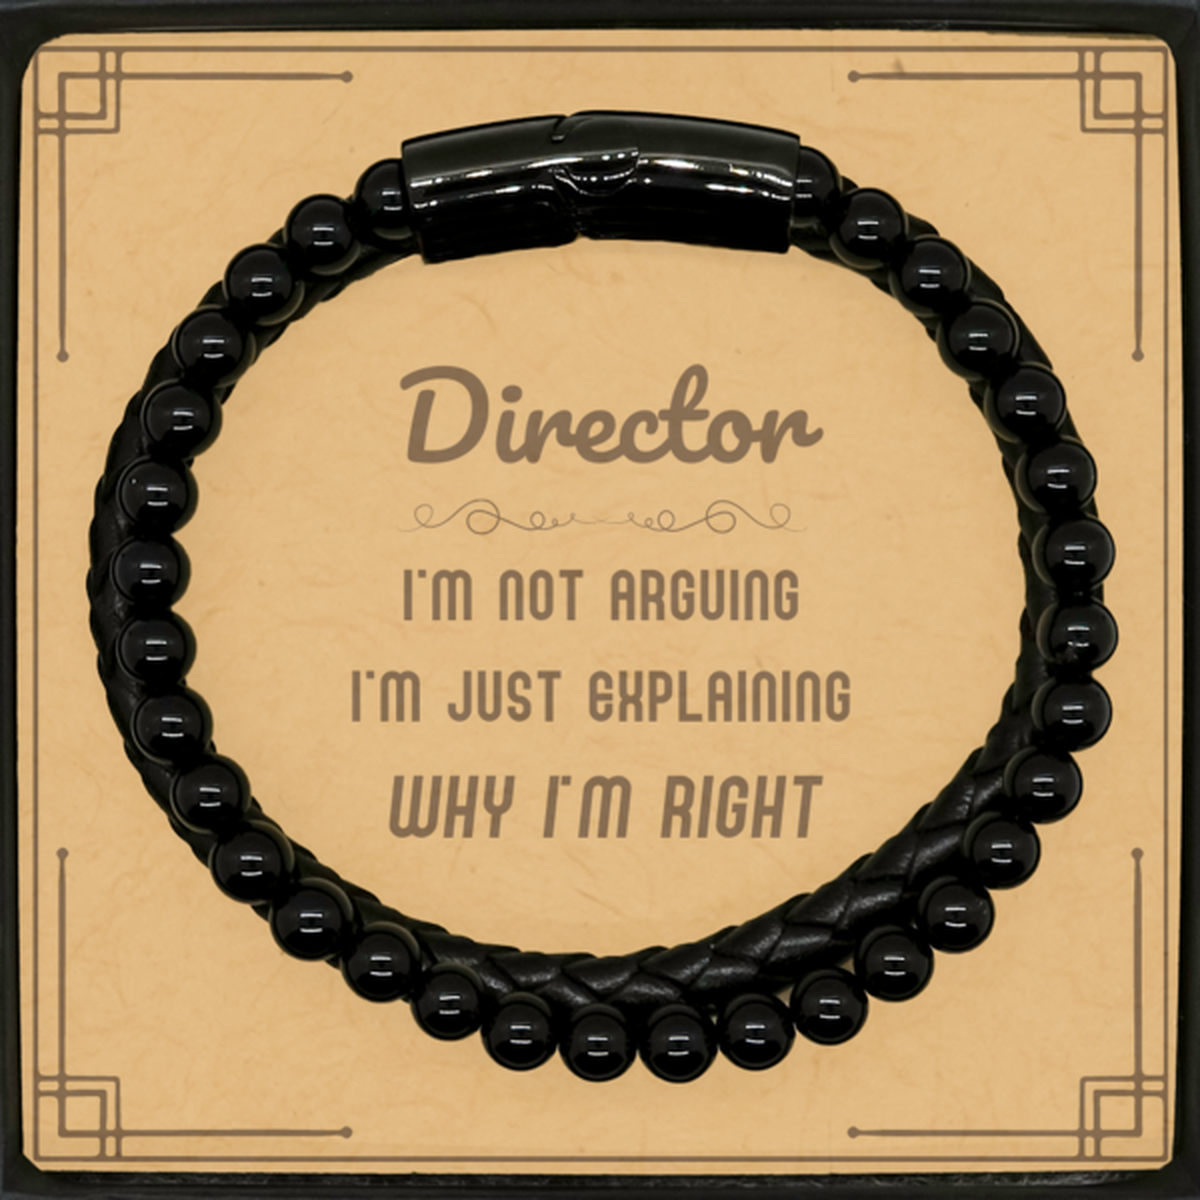 Director I'm not Arguing. I'm Just Explaining Why I'm RIGHT Stone Leather Bracelets, Funny Saying Quote Director Gifts For Director Message Card Graduation Birthday Christmas Gifts for Men Women Coworker